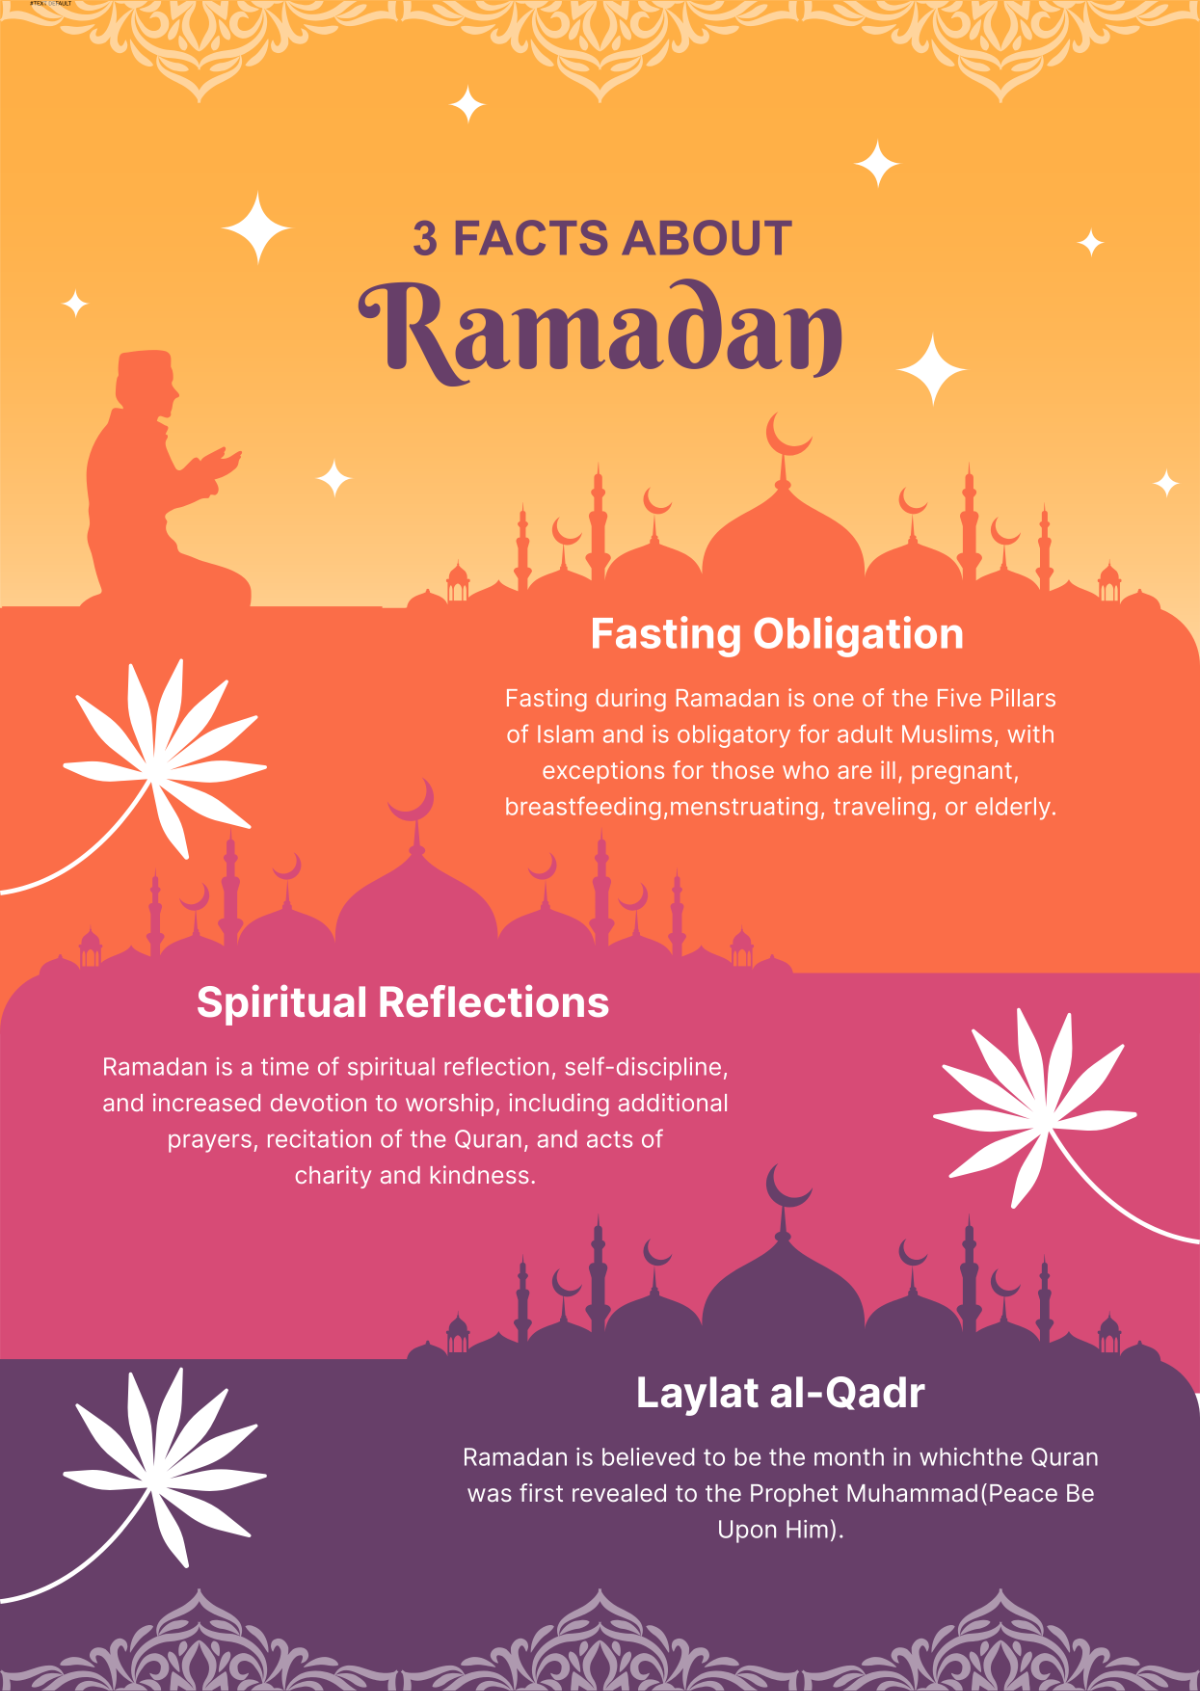 Facts about Ramadan